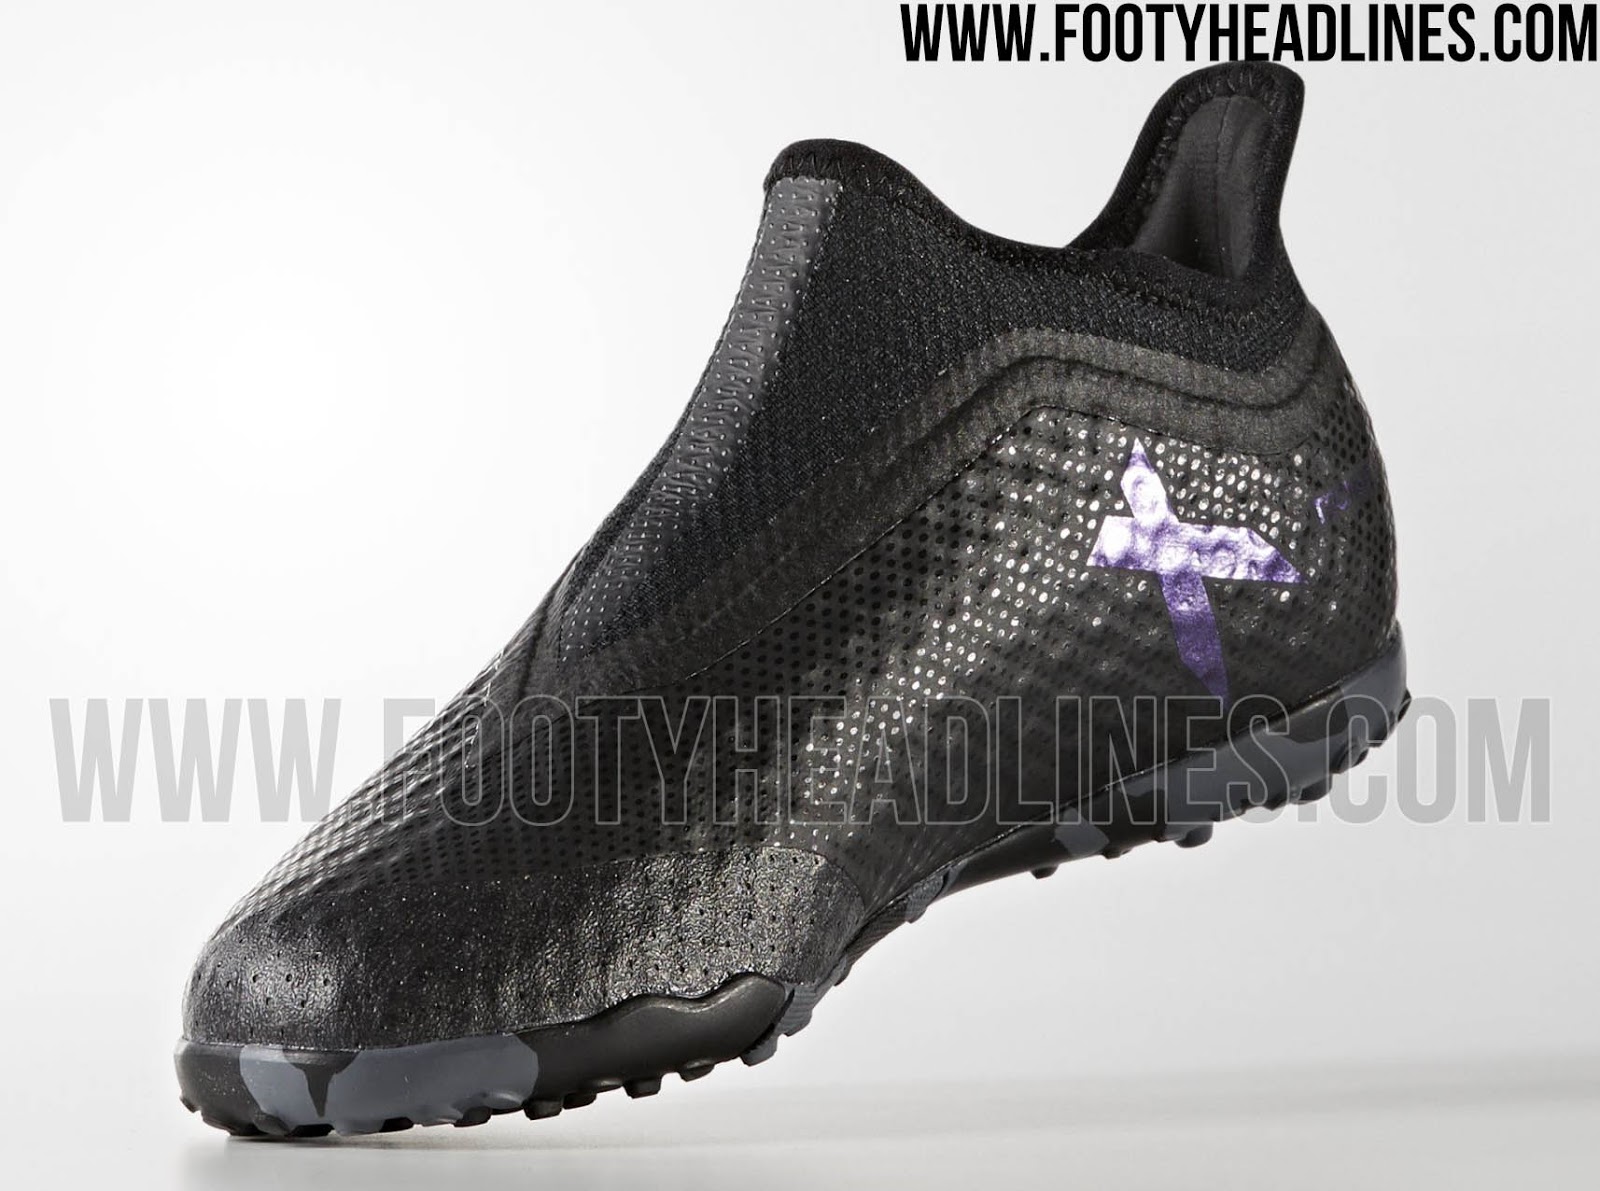 Laceless Adidas X Tango 17+ Purespeed Magnetic Storm Pack Boots - Footy Headlines